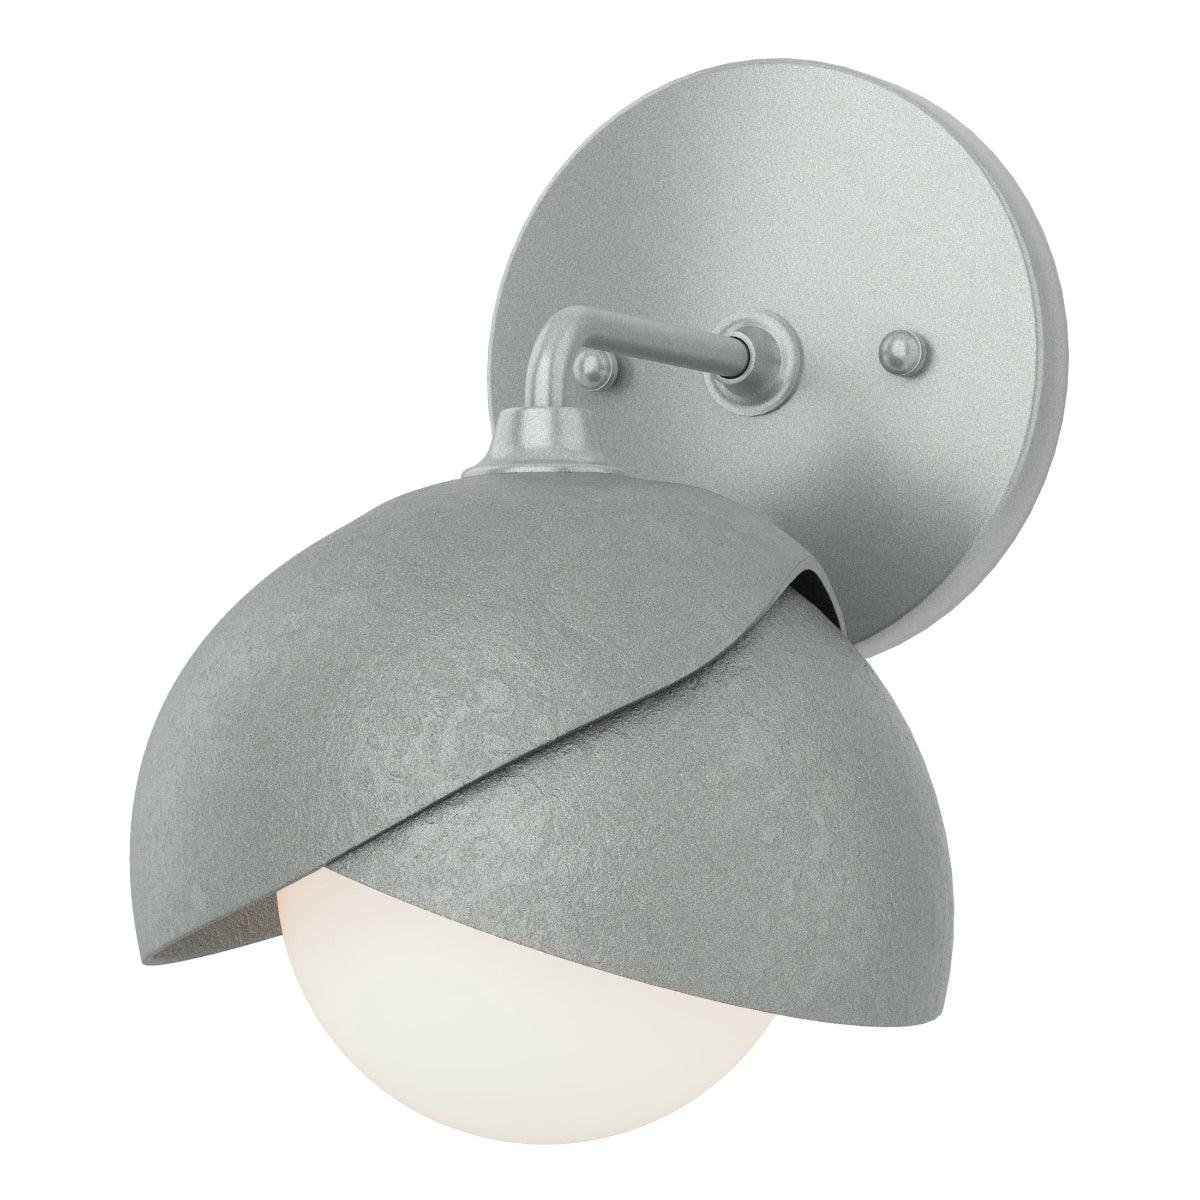 Brooklyn 9 in. Armed Sconce Vintage Platinum finish